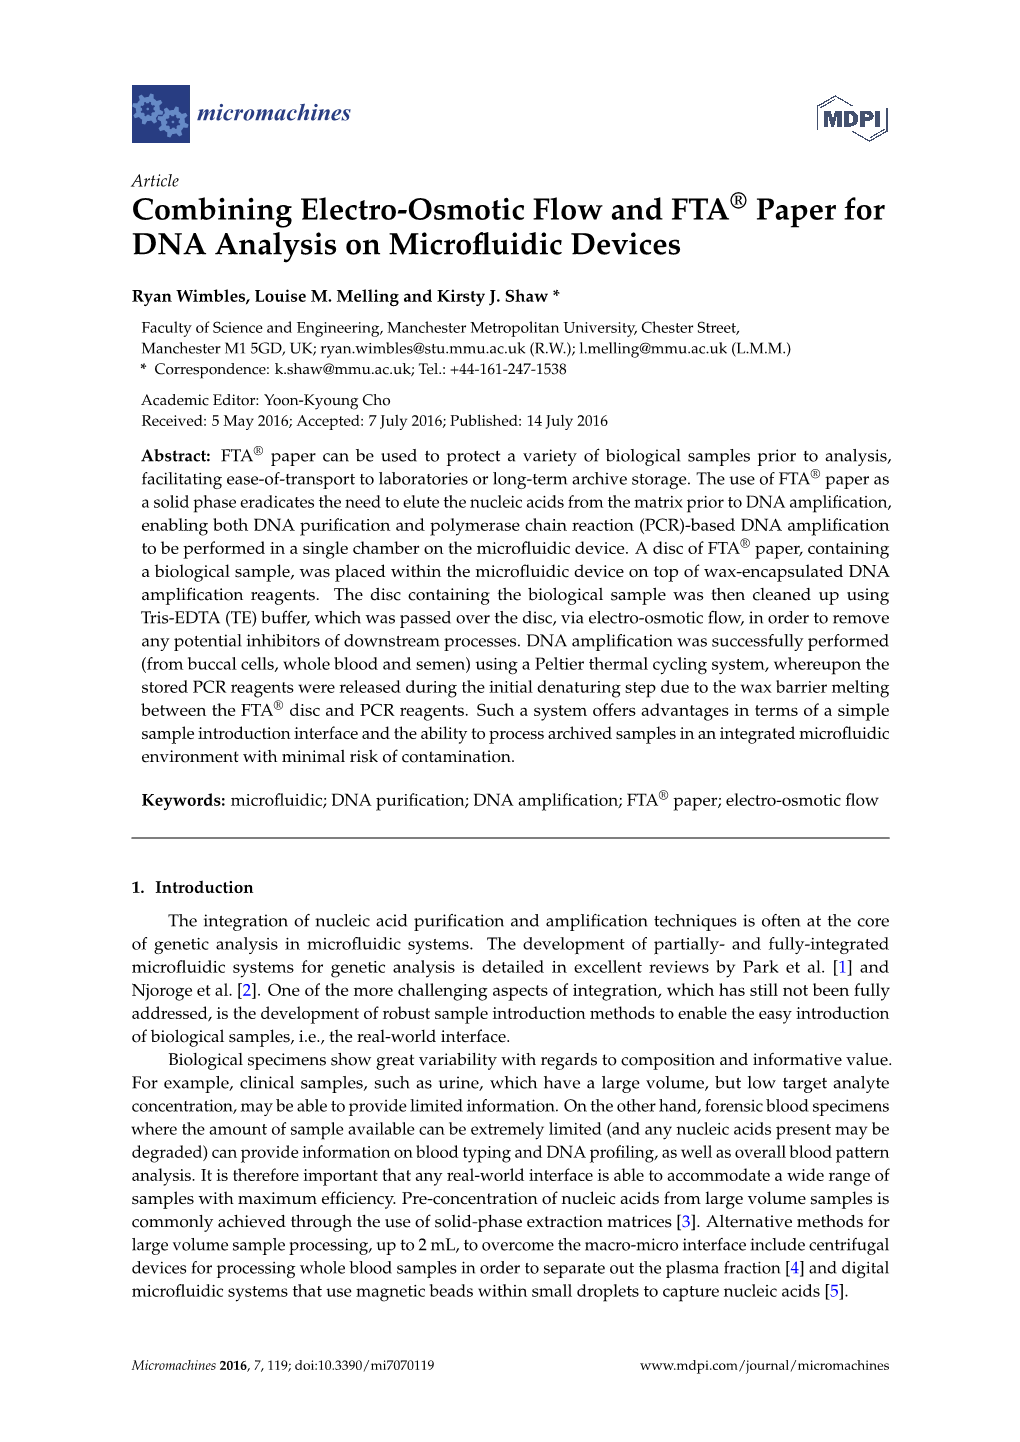 Combining Electro-Osmotic Flow and FTA® Paper for DNA Analysis on Microﬂuidic Devices